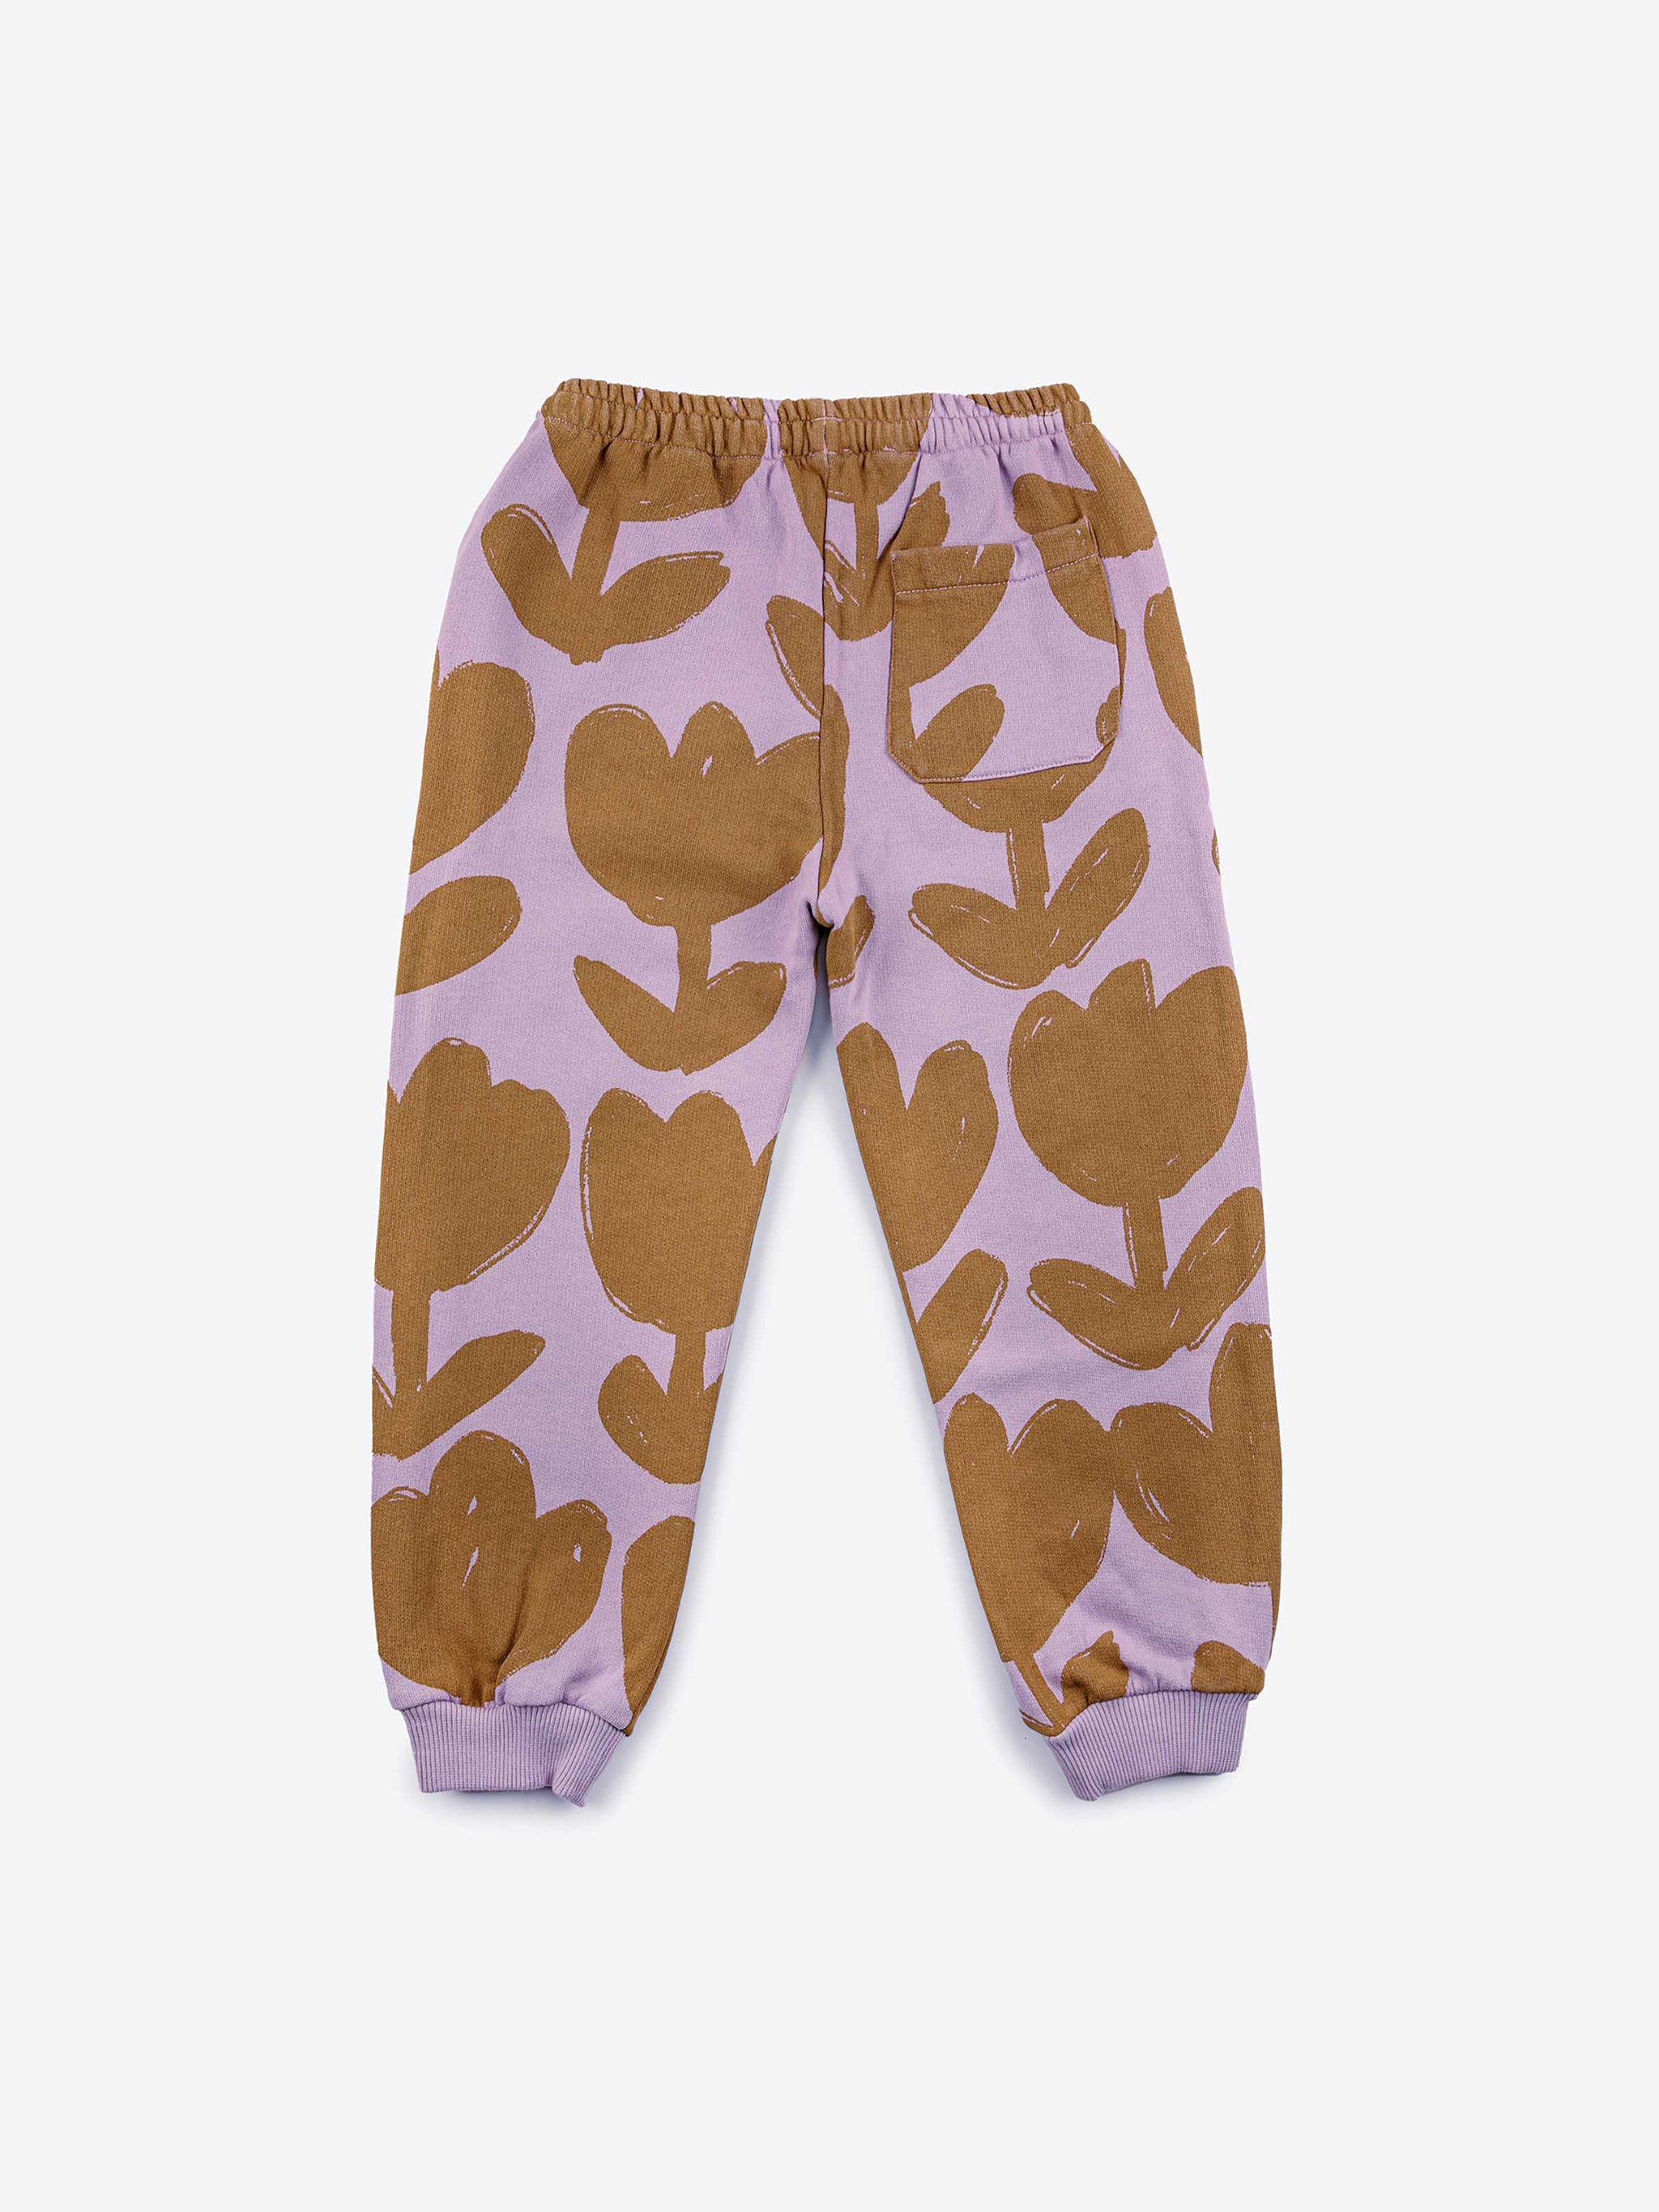 Retro Flowers all over jogging pants - 2-3Y